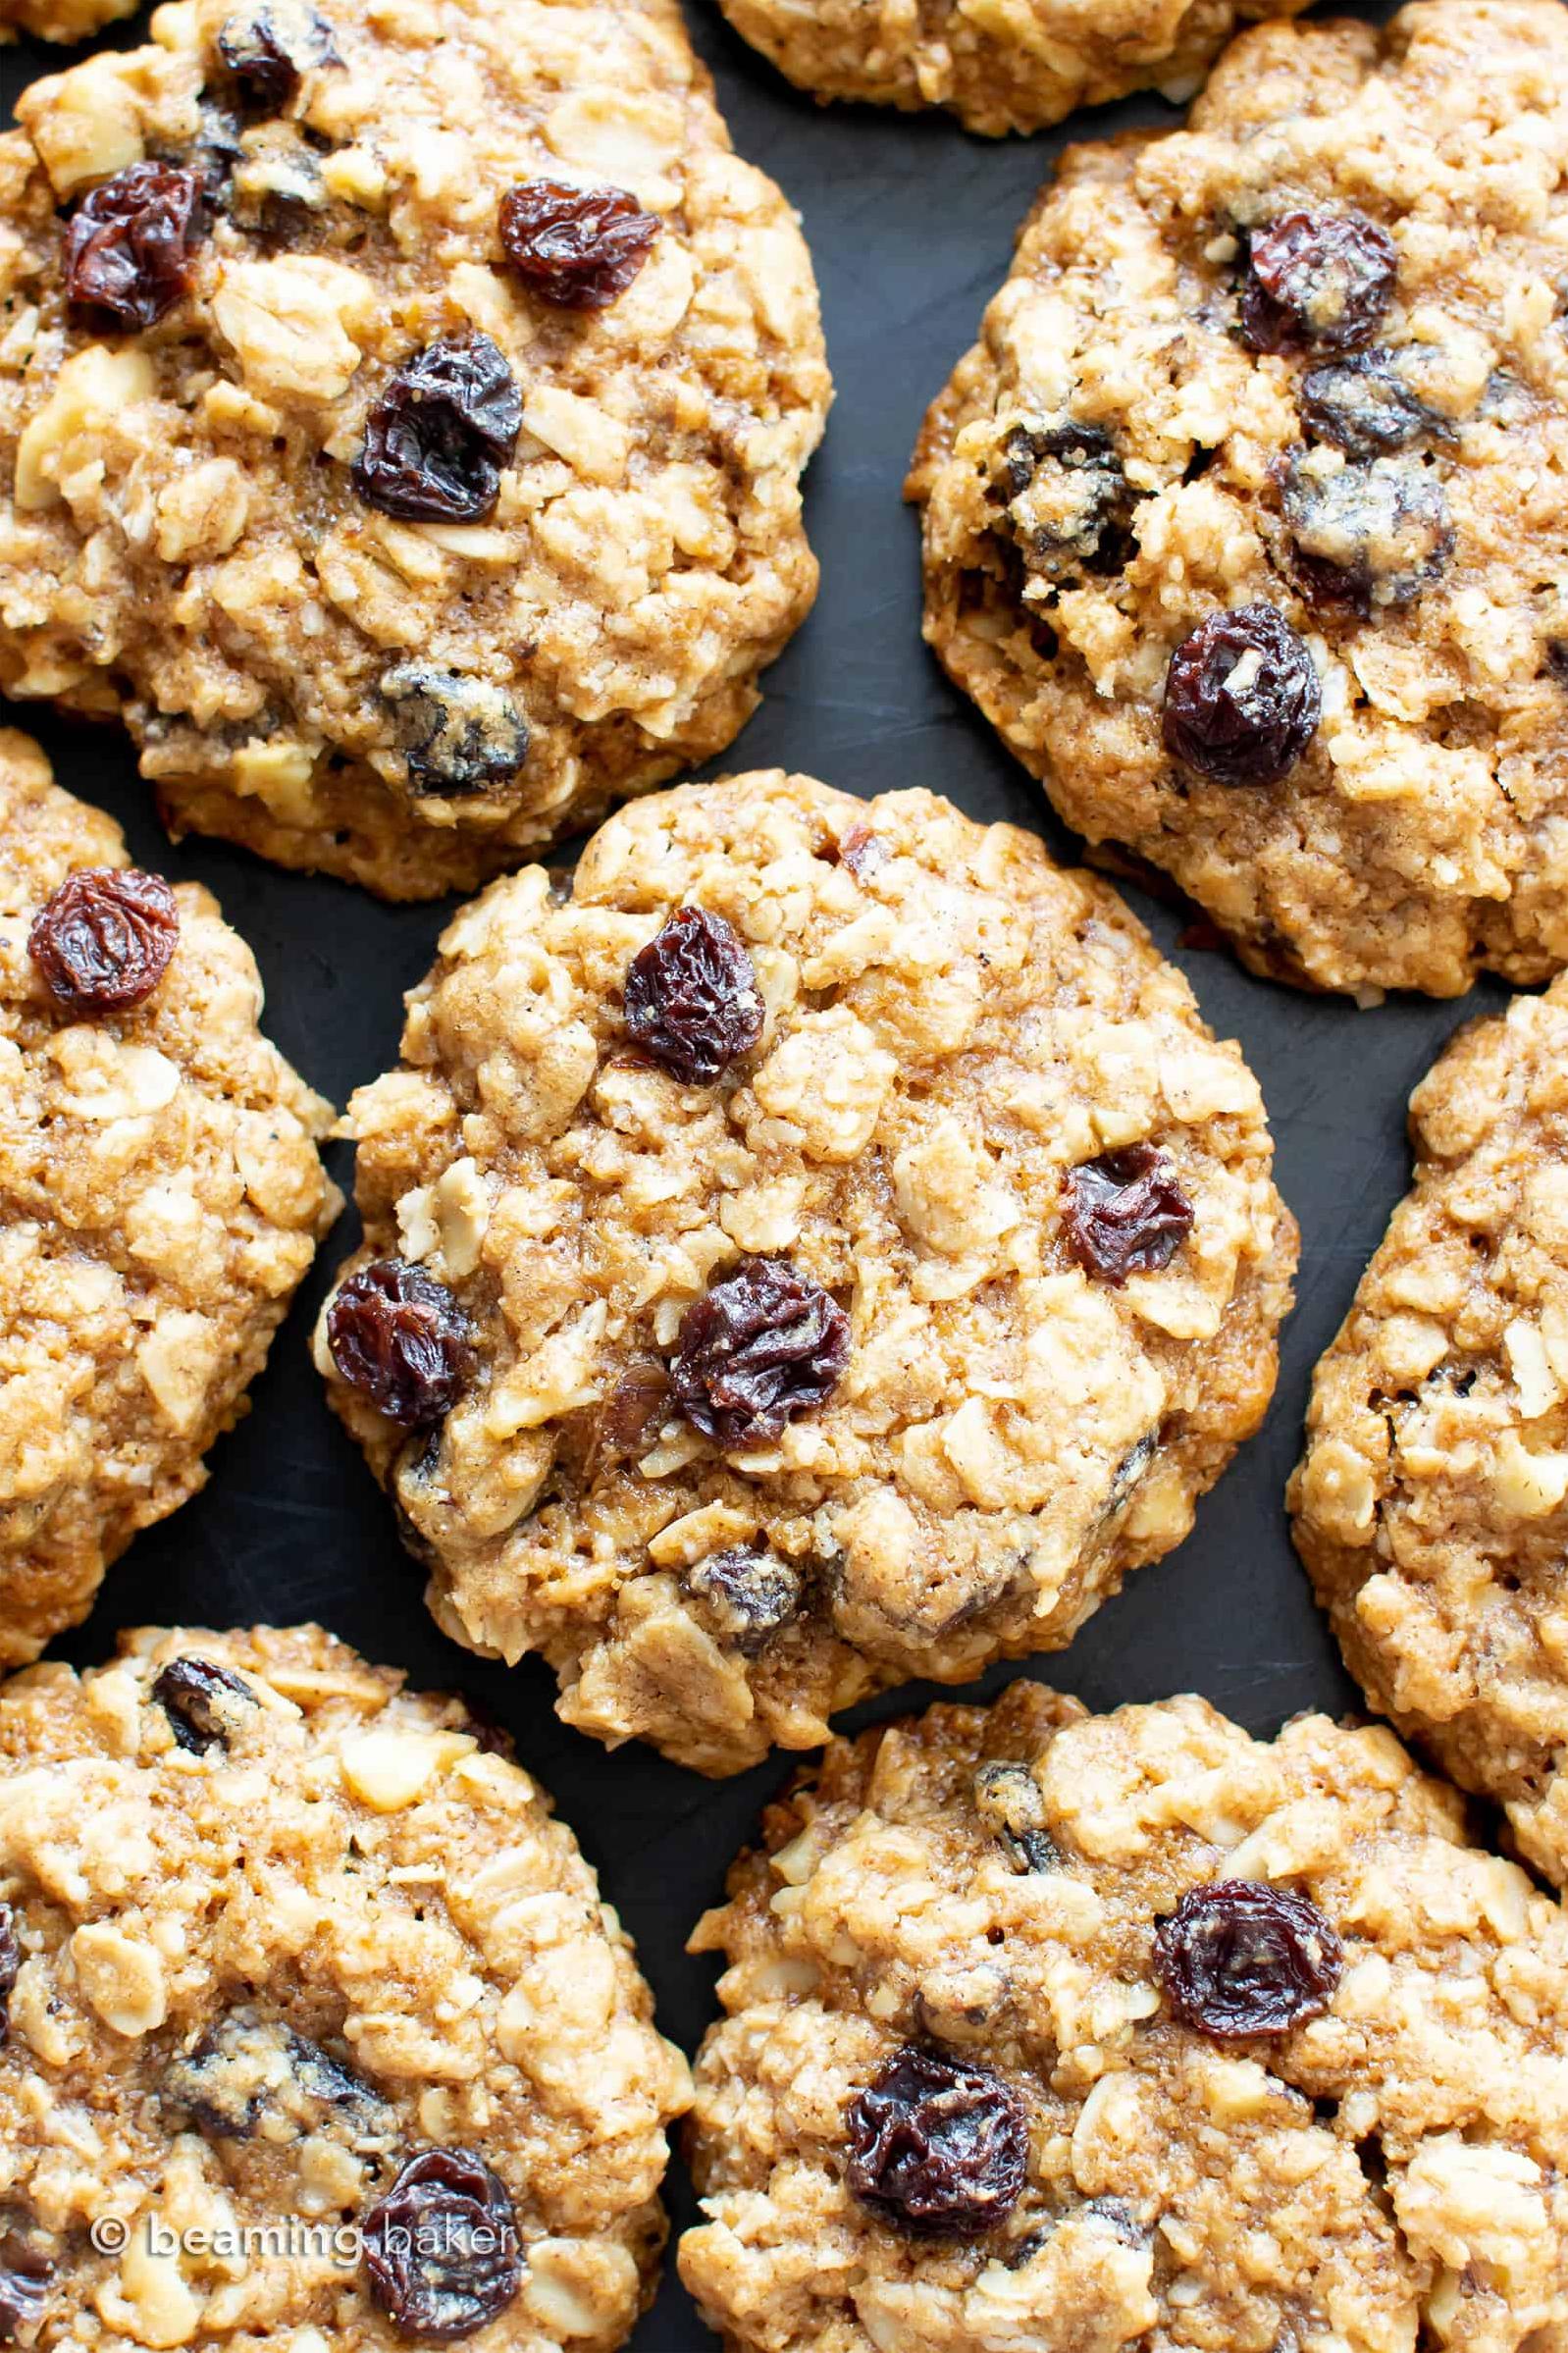  Who needs store-bought cookies when you can make these delicious, healthy ones at home?